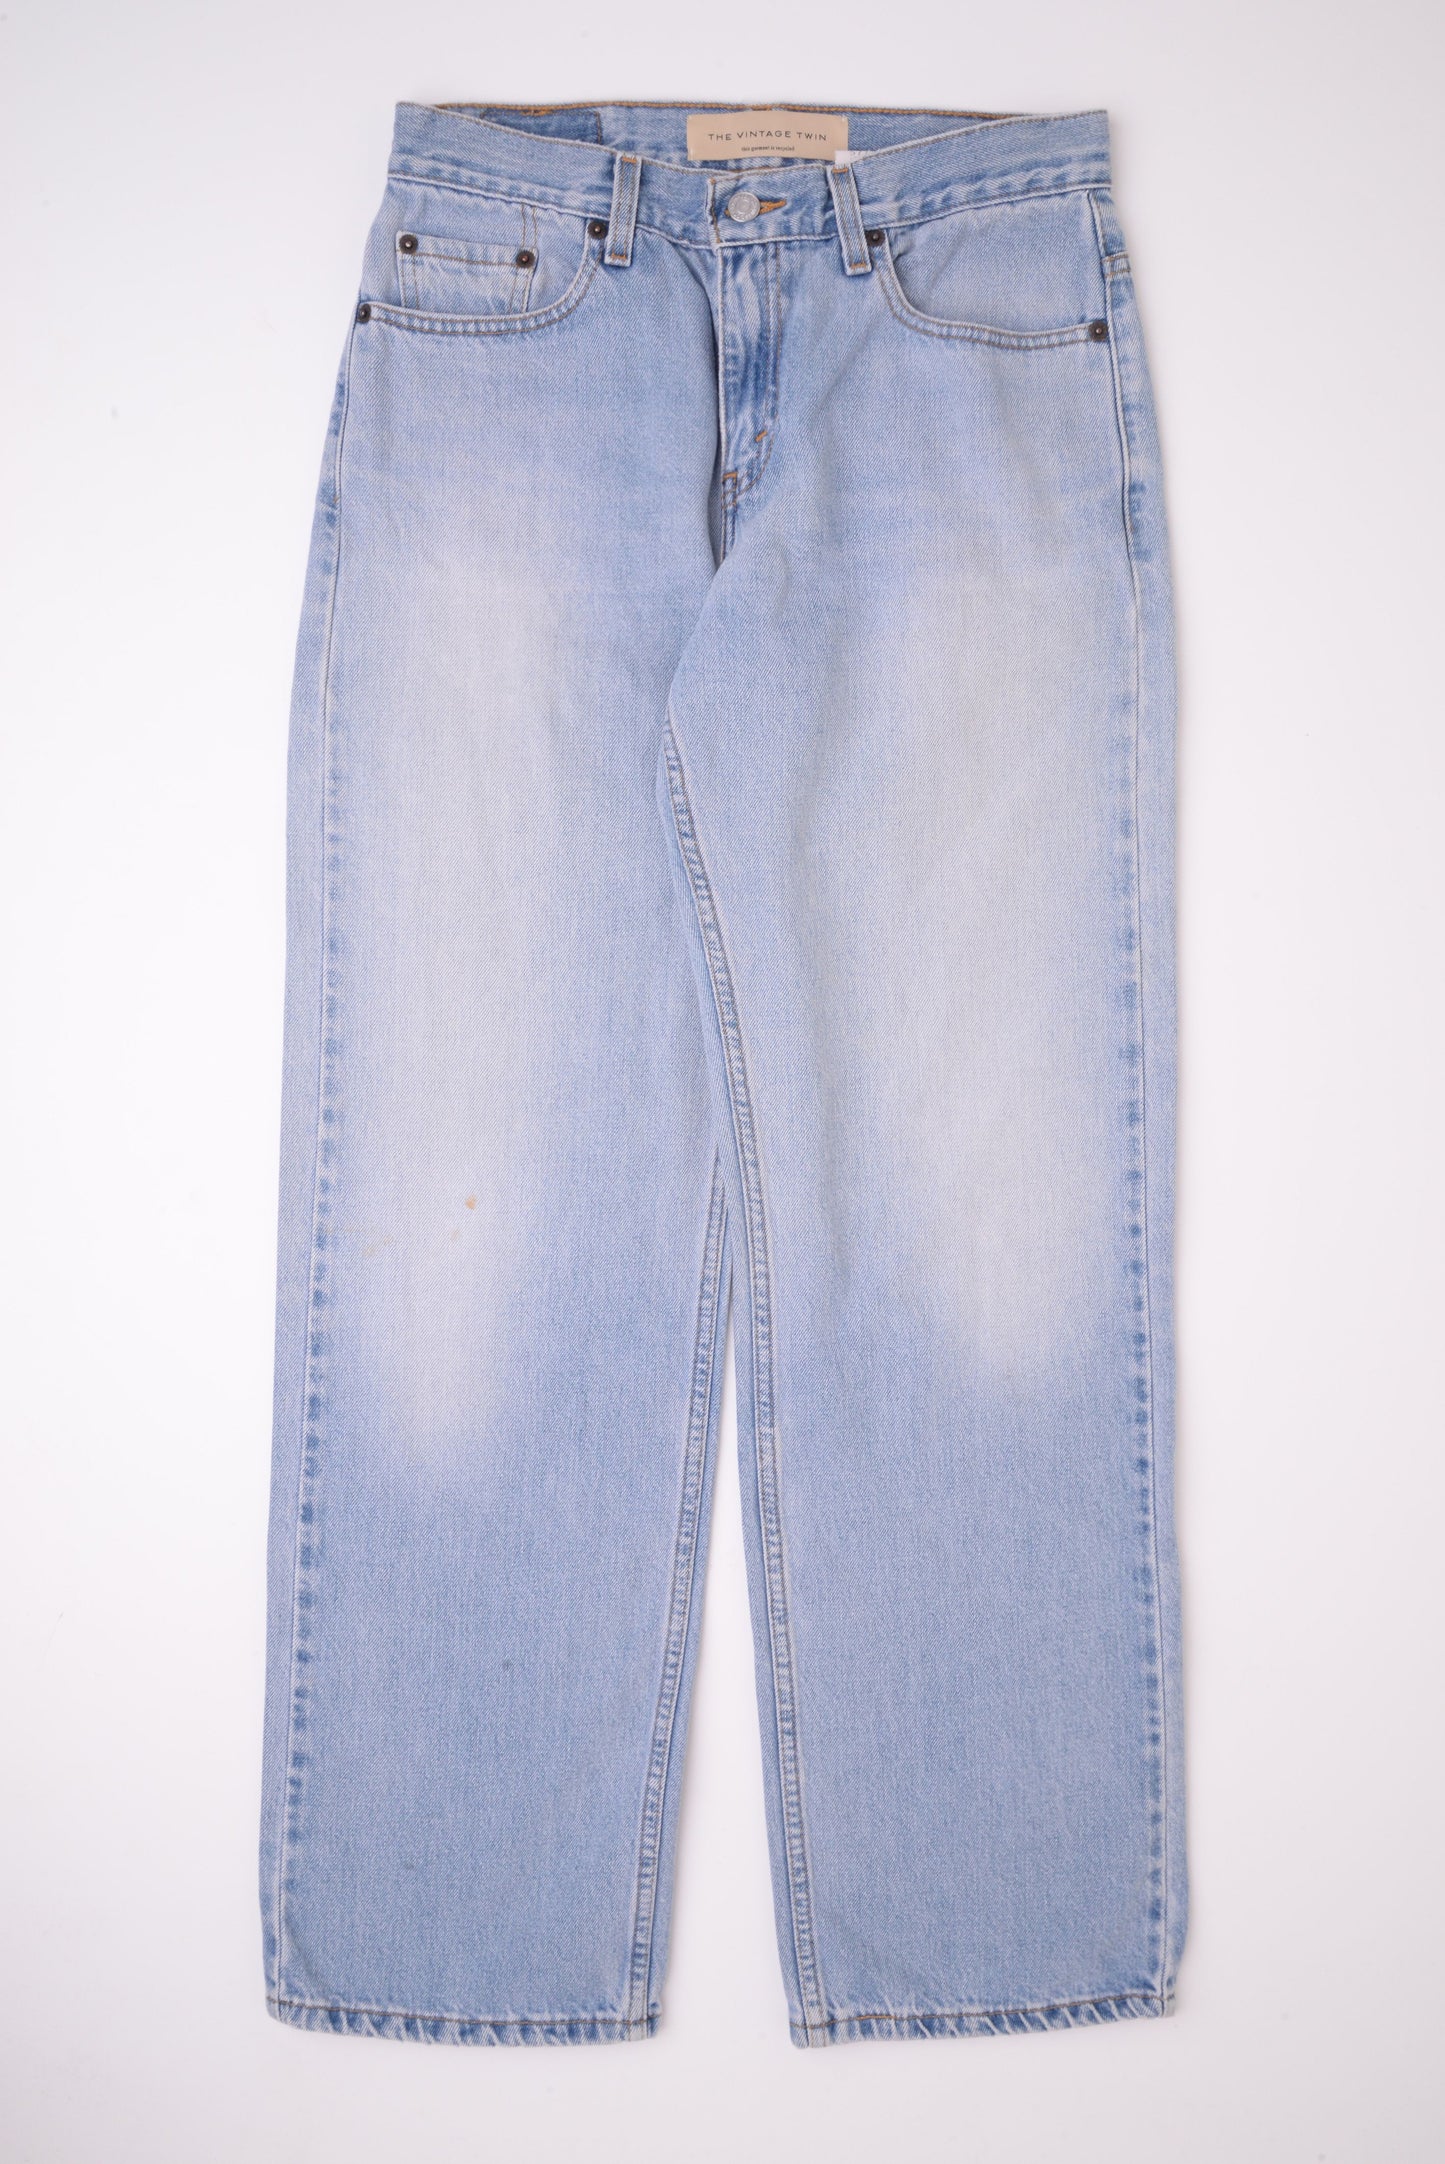 1990s Low and Loose Levi's 577 Jeans 30W x 31L